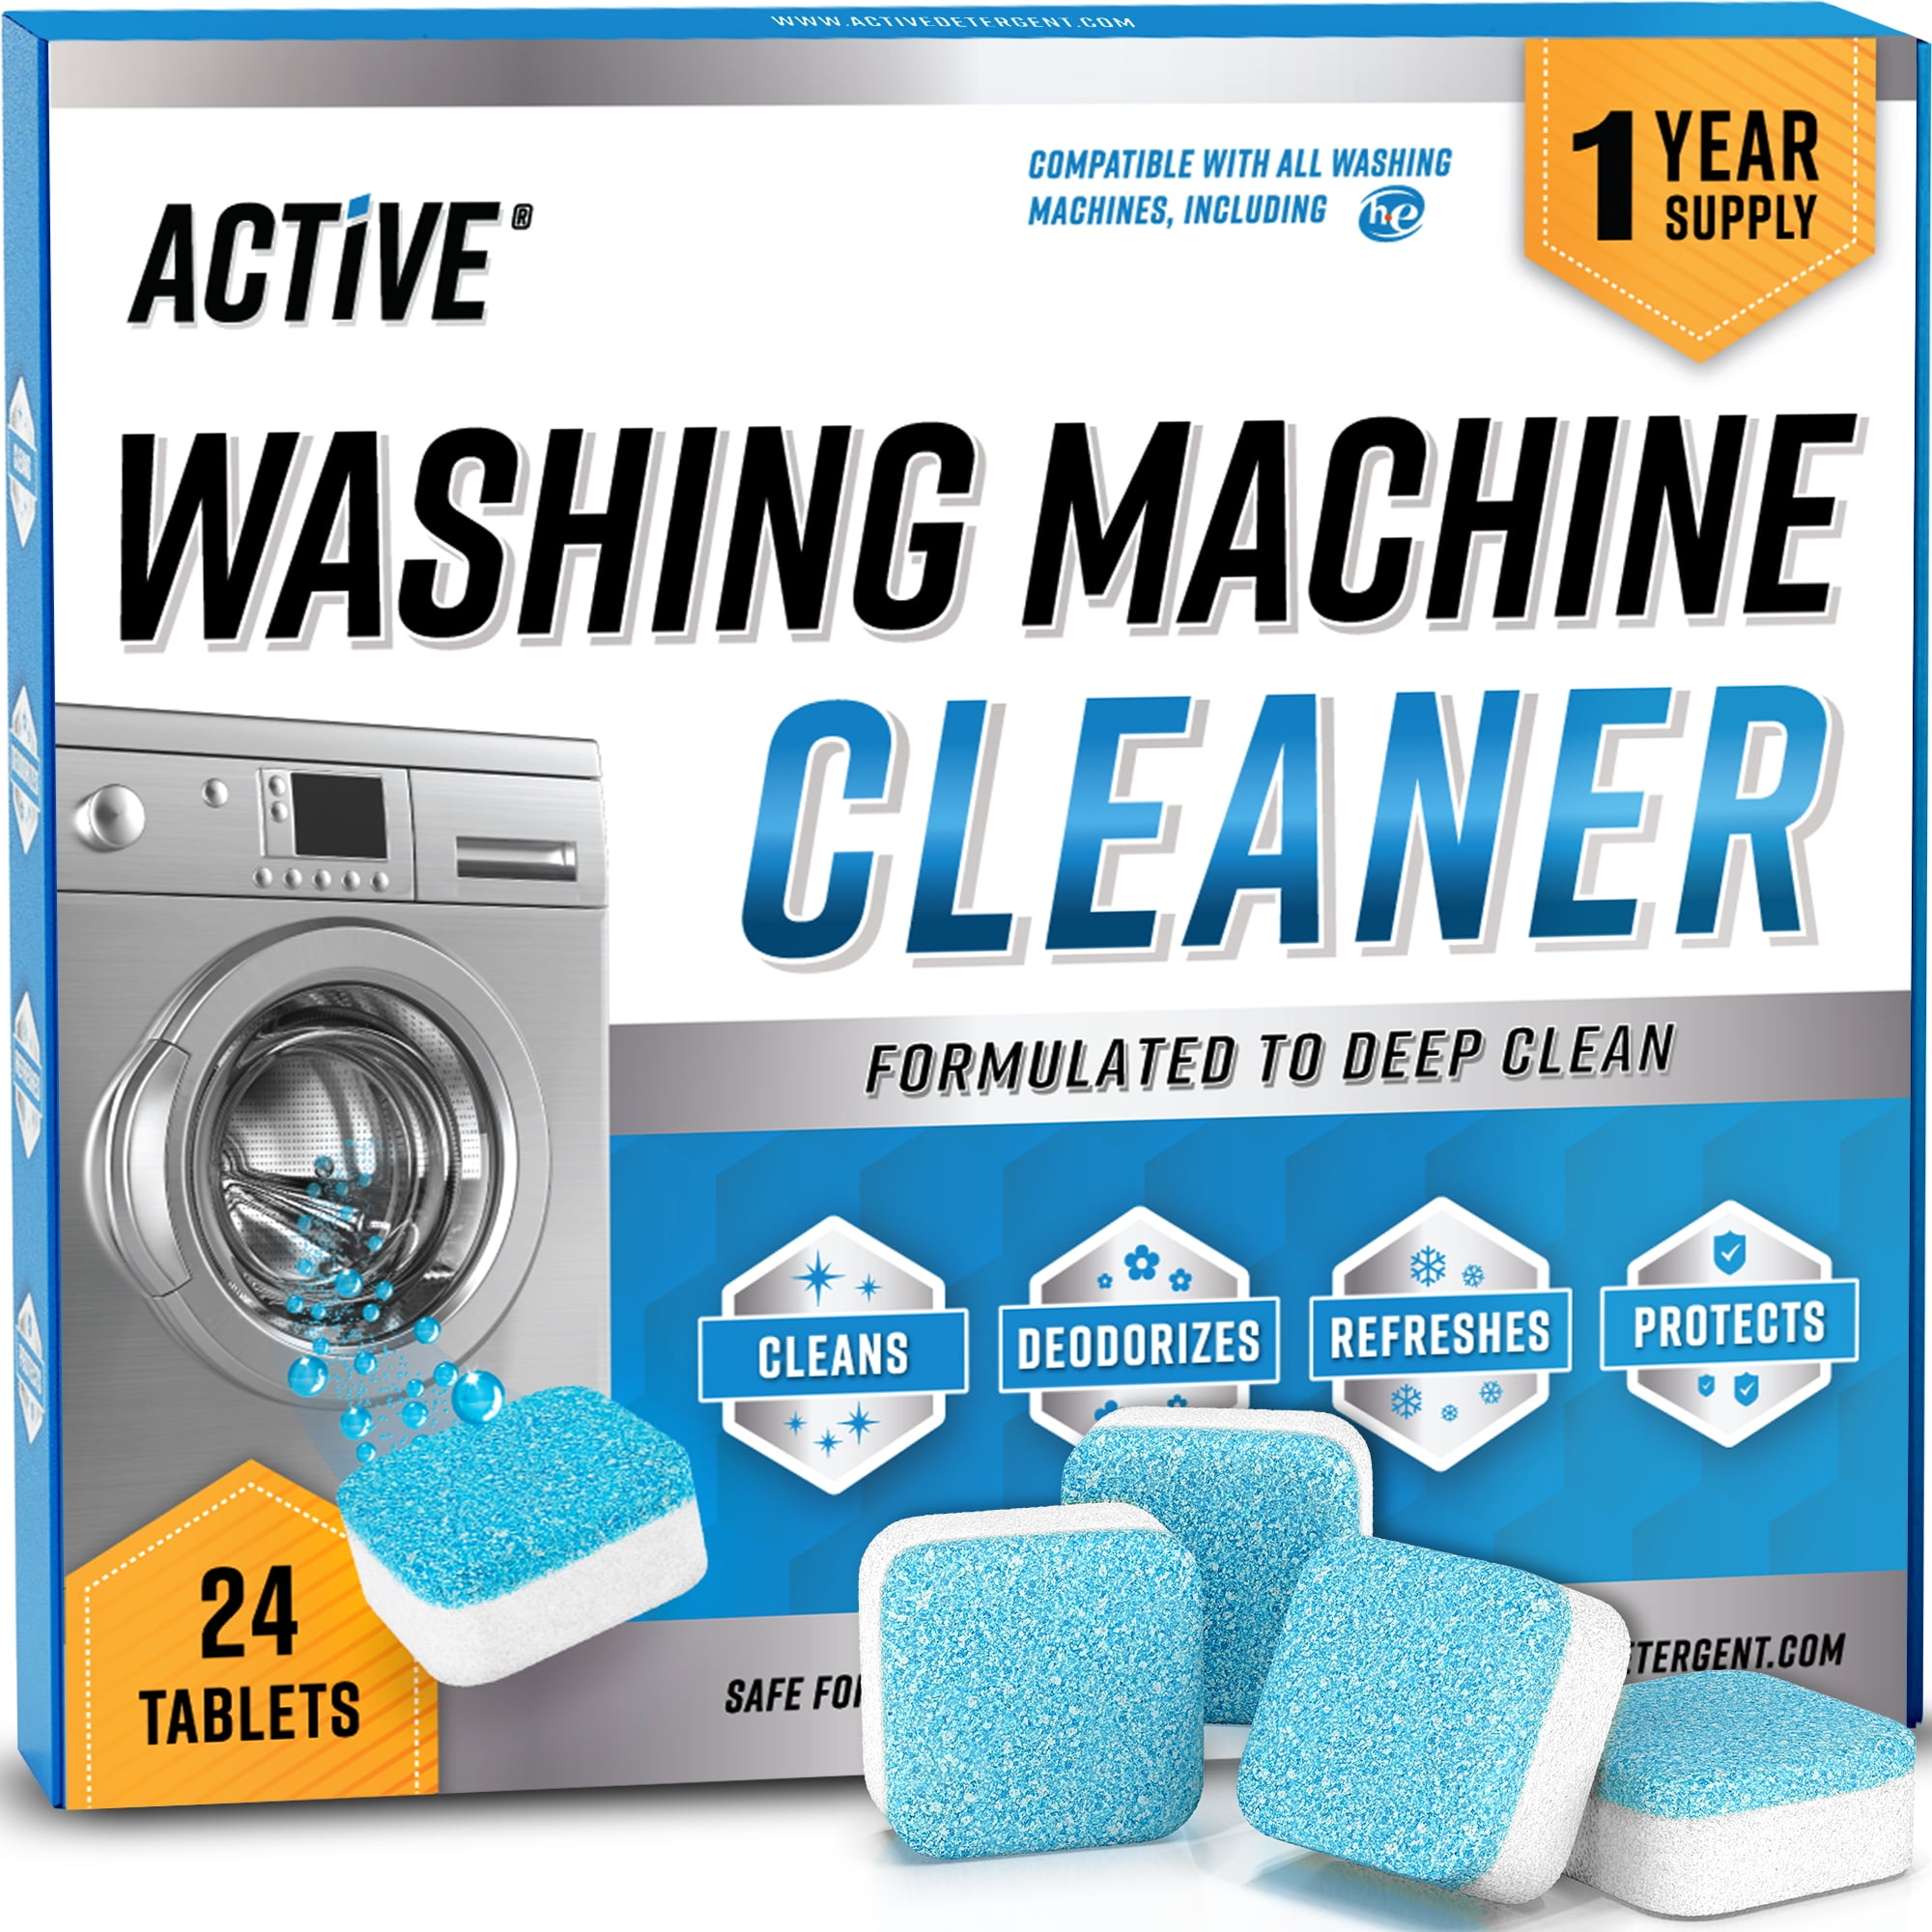 Splash Spotless Washing Machine Cleaner Deep Cleaning for He Top Load Washers and Front Load, 24 Tablets.